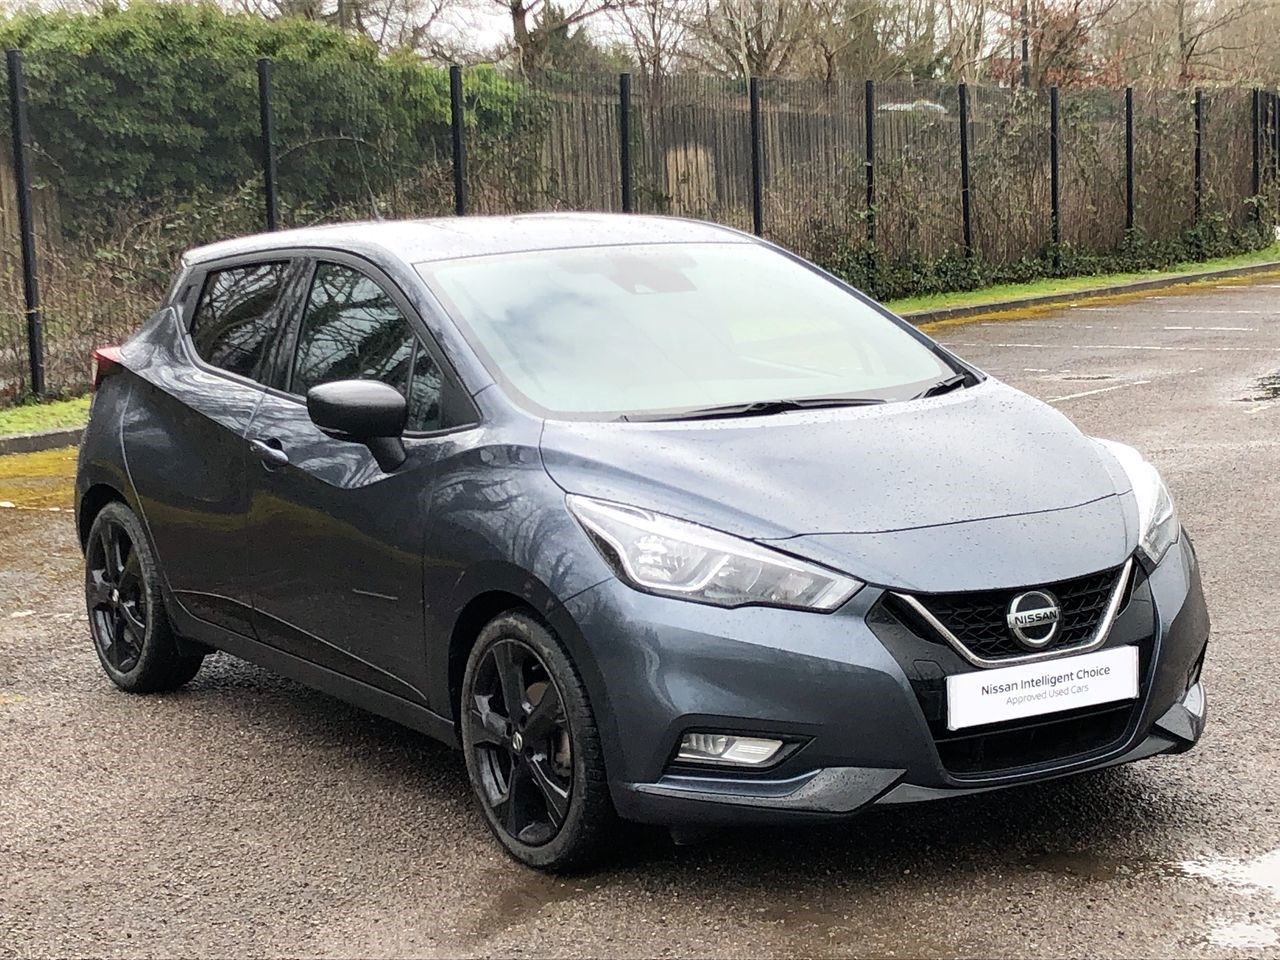 2020 used Nissan Micra IG-T 100 XTRONIC N-Sport